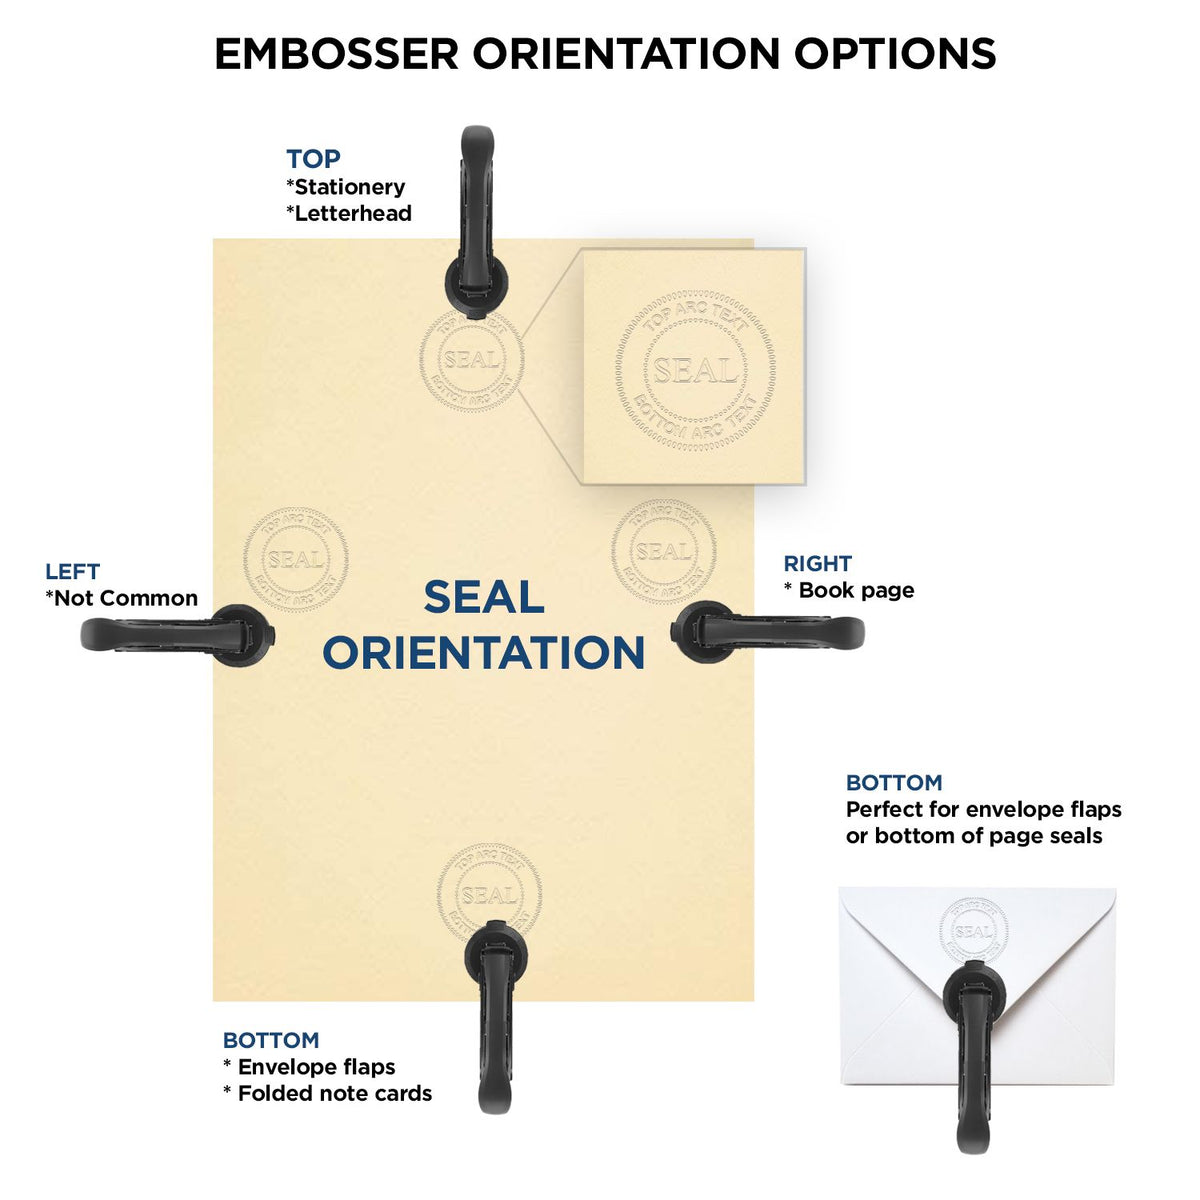 An infographic for the Heavy Duty Cast Iron New Hampshire Architect Embosser showing embosser orientation, this is showing examples of a top, bottom, right and left insert.